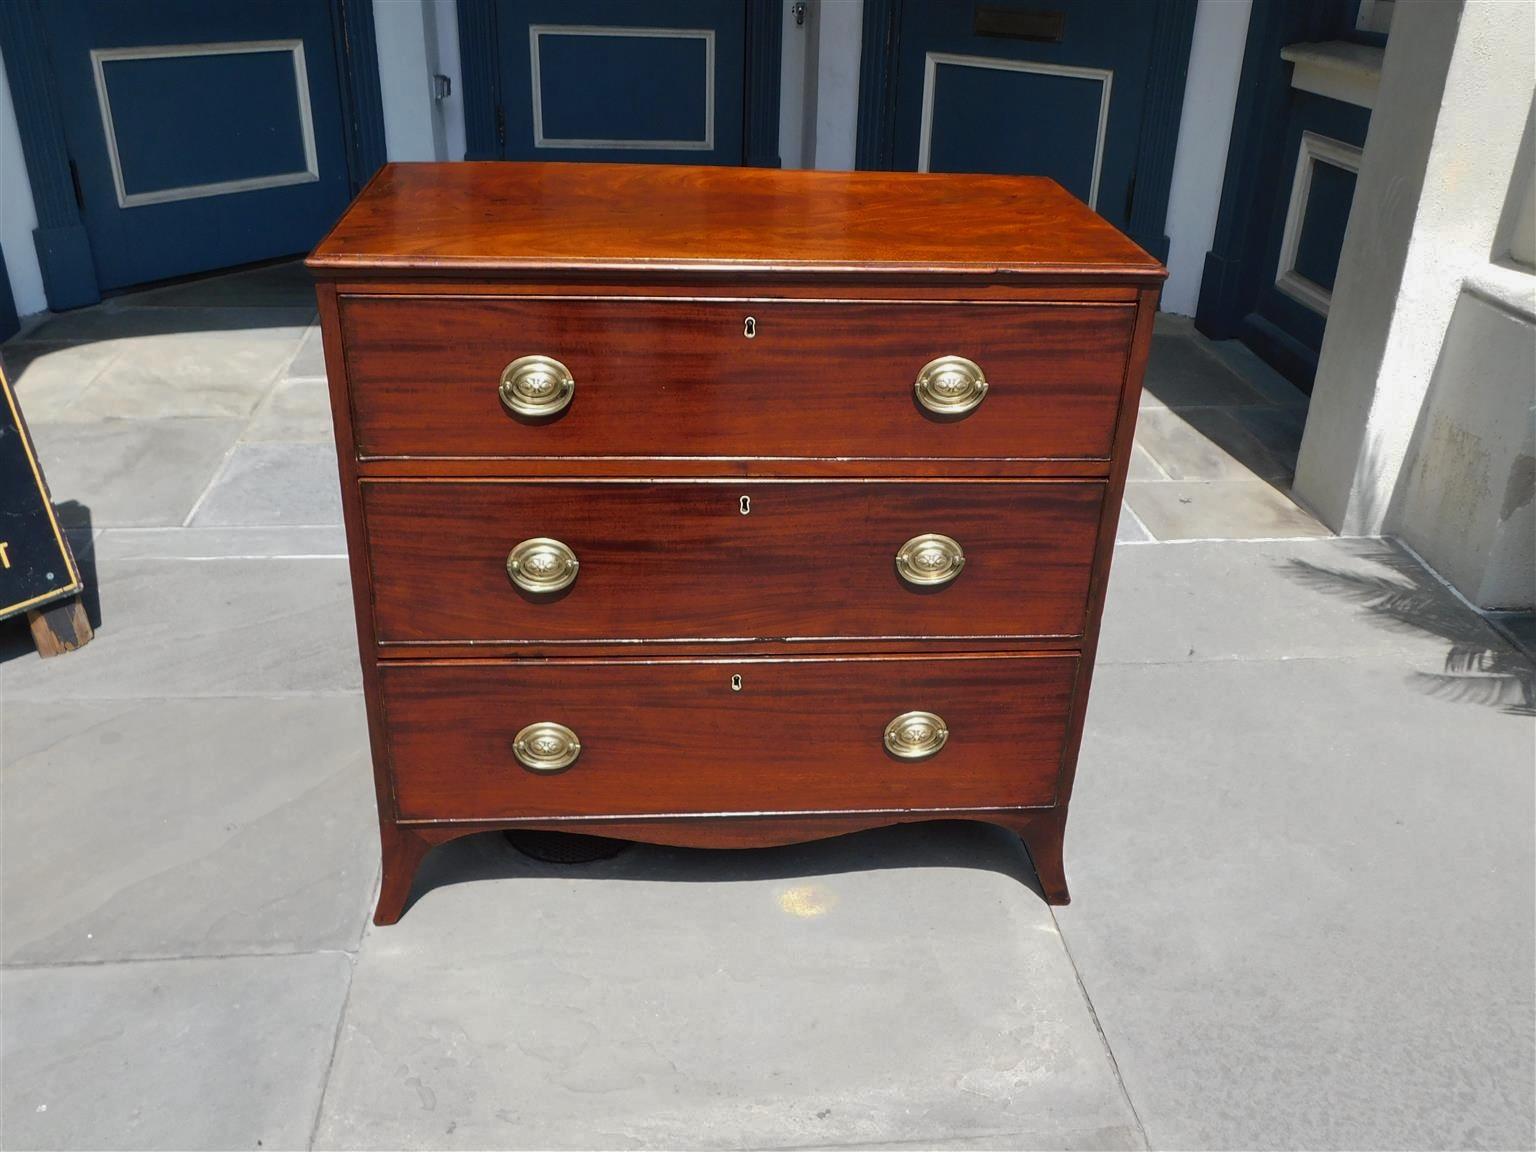 English Hepplewhite Mahogany graduated three drawer chest with a carved molded edge top, original brasses, escutcheons, interior locks, scalloped skirt, and resting on the original splayed feet. Late 18th century.